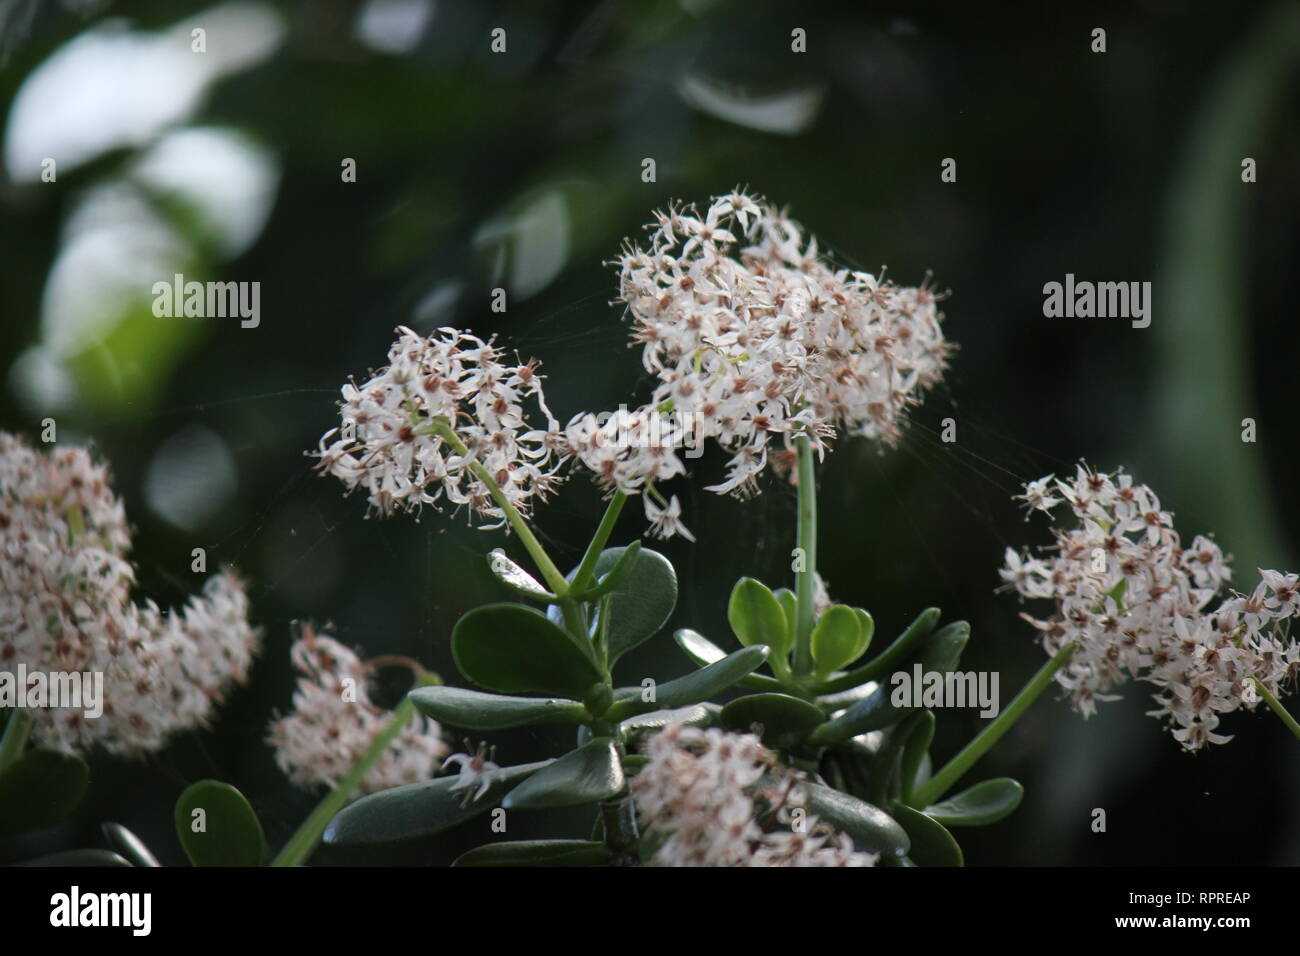 Flawless, stunning cultivated jade plant, lucky plant, money plant or money tree small white flowers. Stock Photo